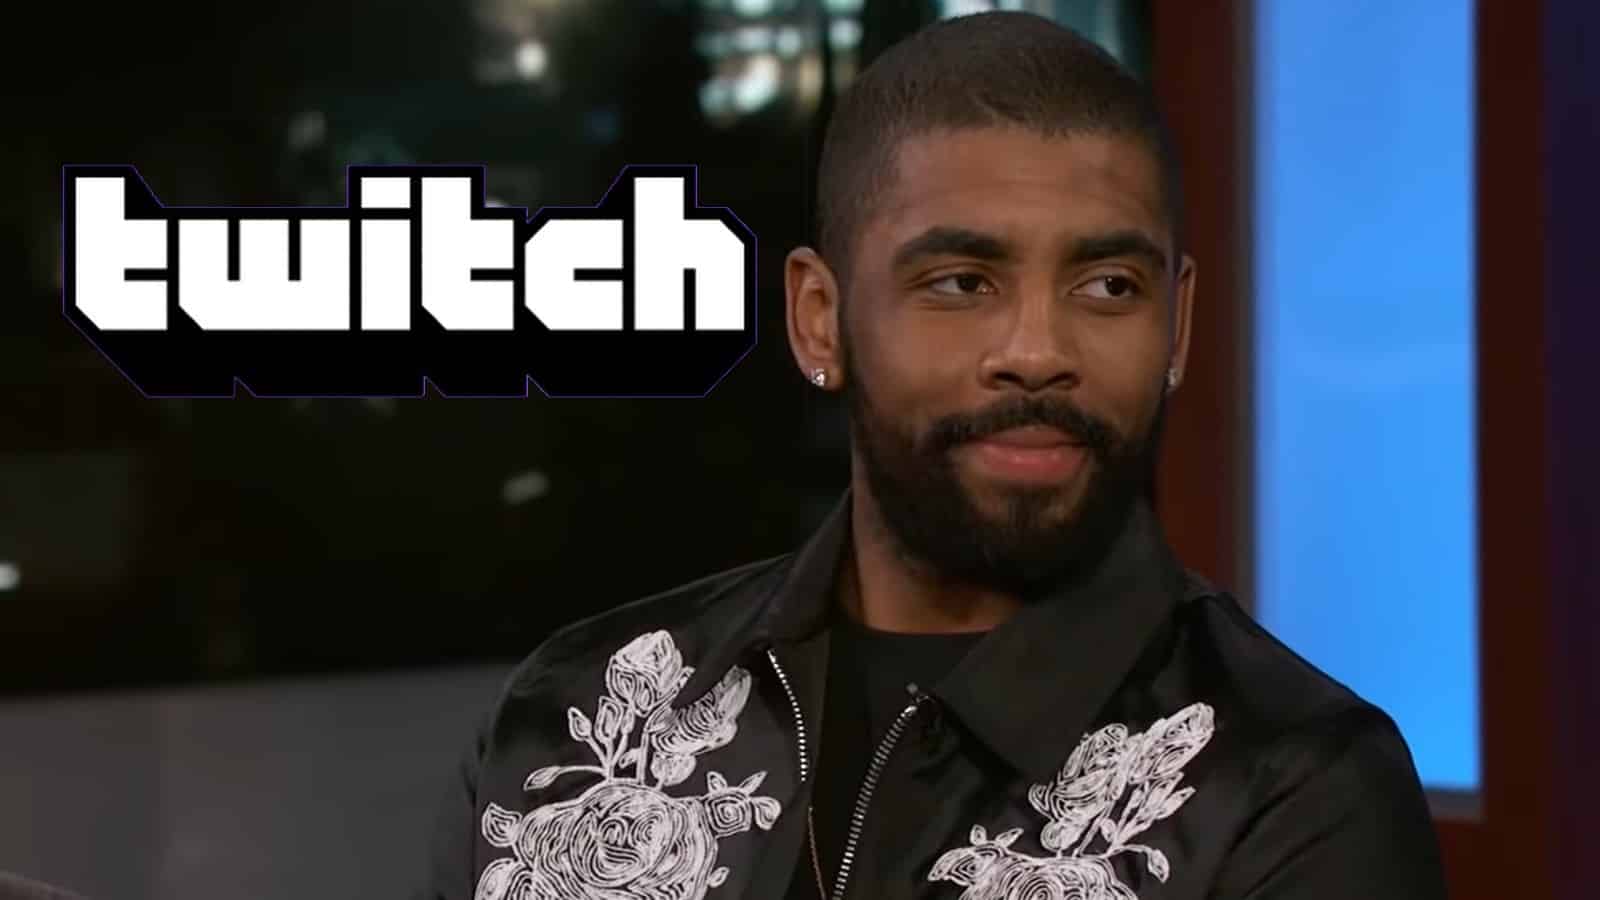 NBA star Kyrie Irving mocks Celtics fans during heated Twitch rant